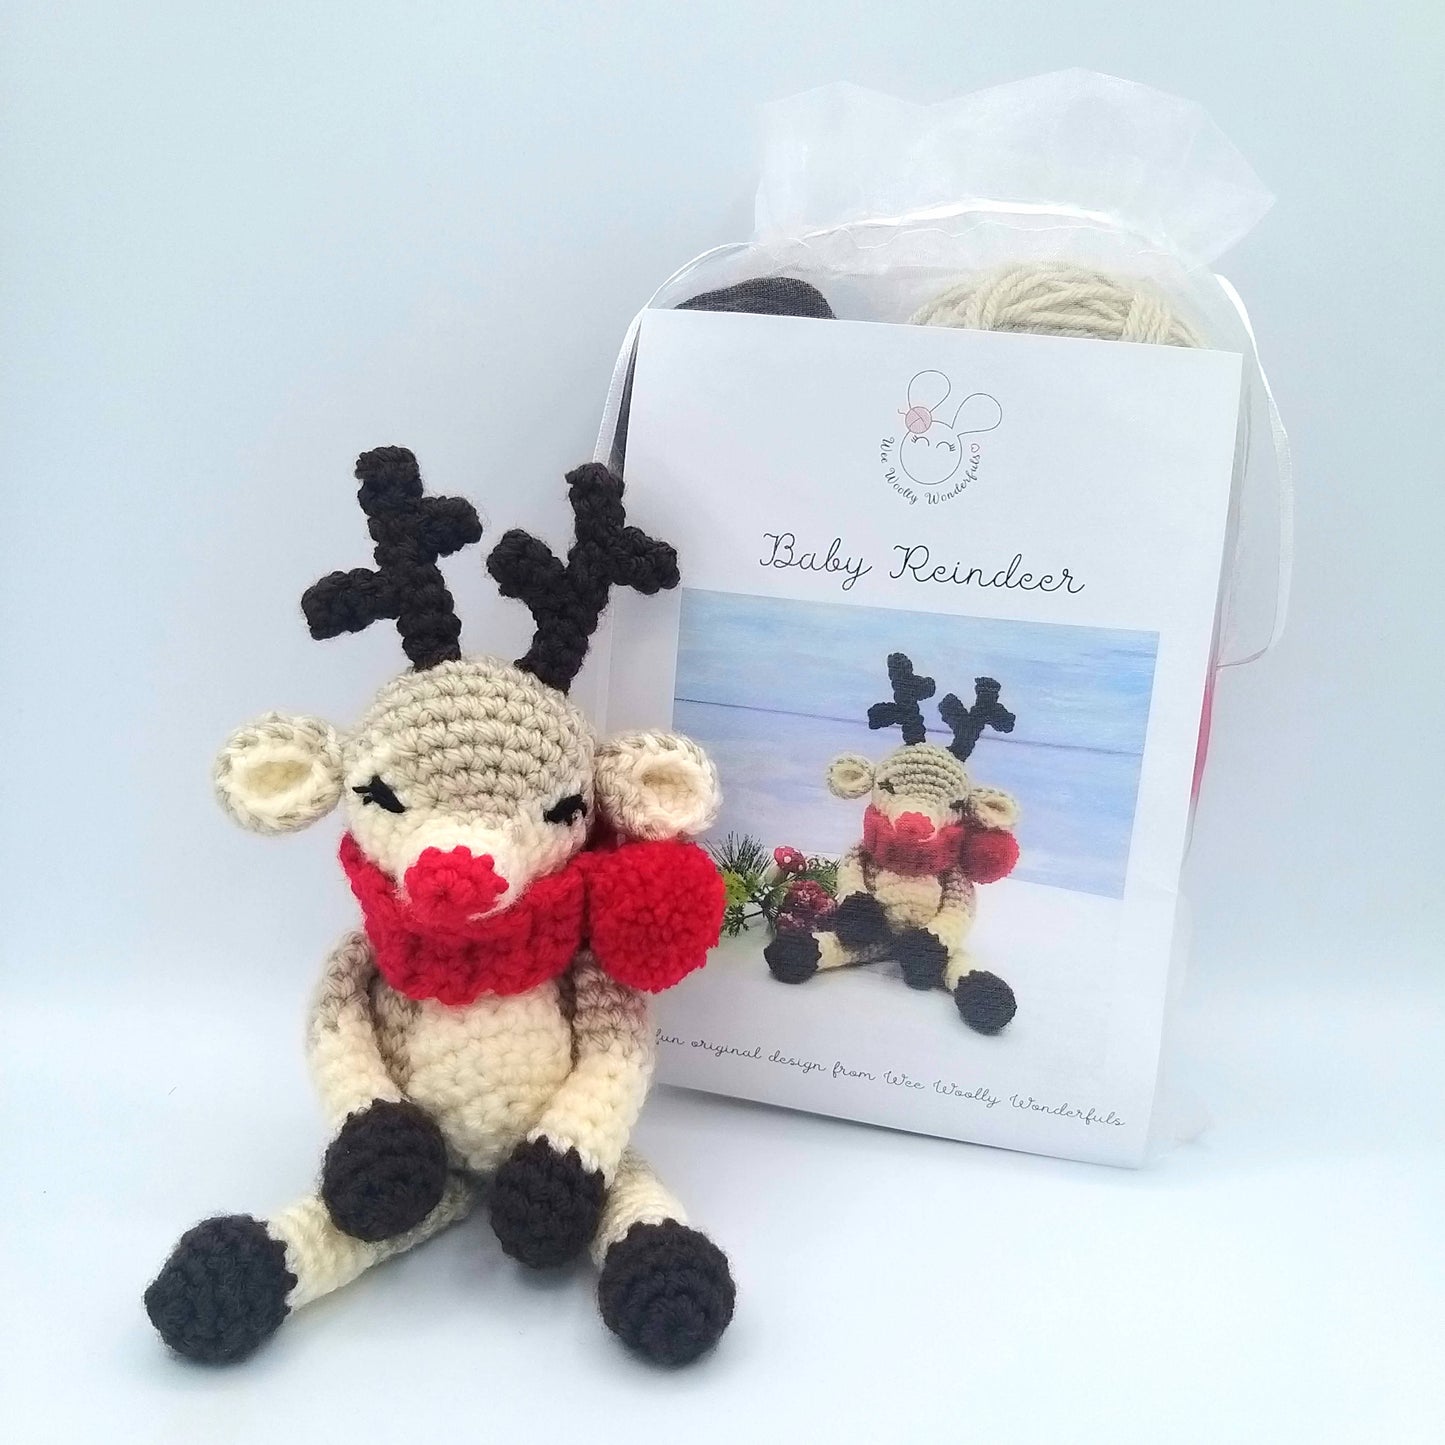 Crochet Reindeer Kit with finished toy